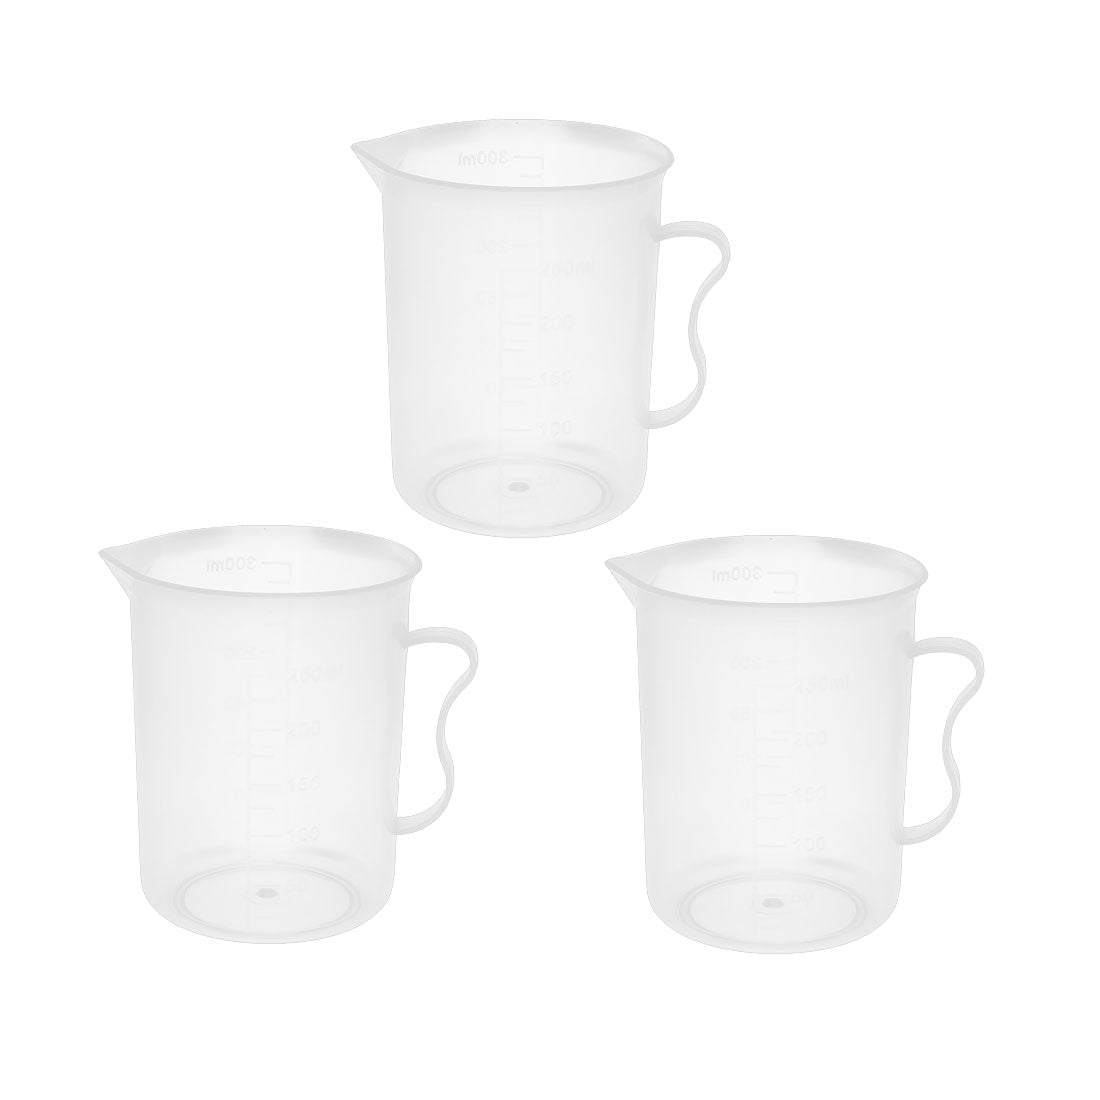 uxcell Uxcell 250ml Clear Plastic Measuring Cup With Handle Beaker Laboratory Set 3 Pcs